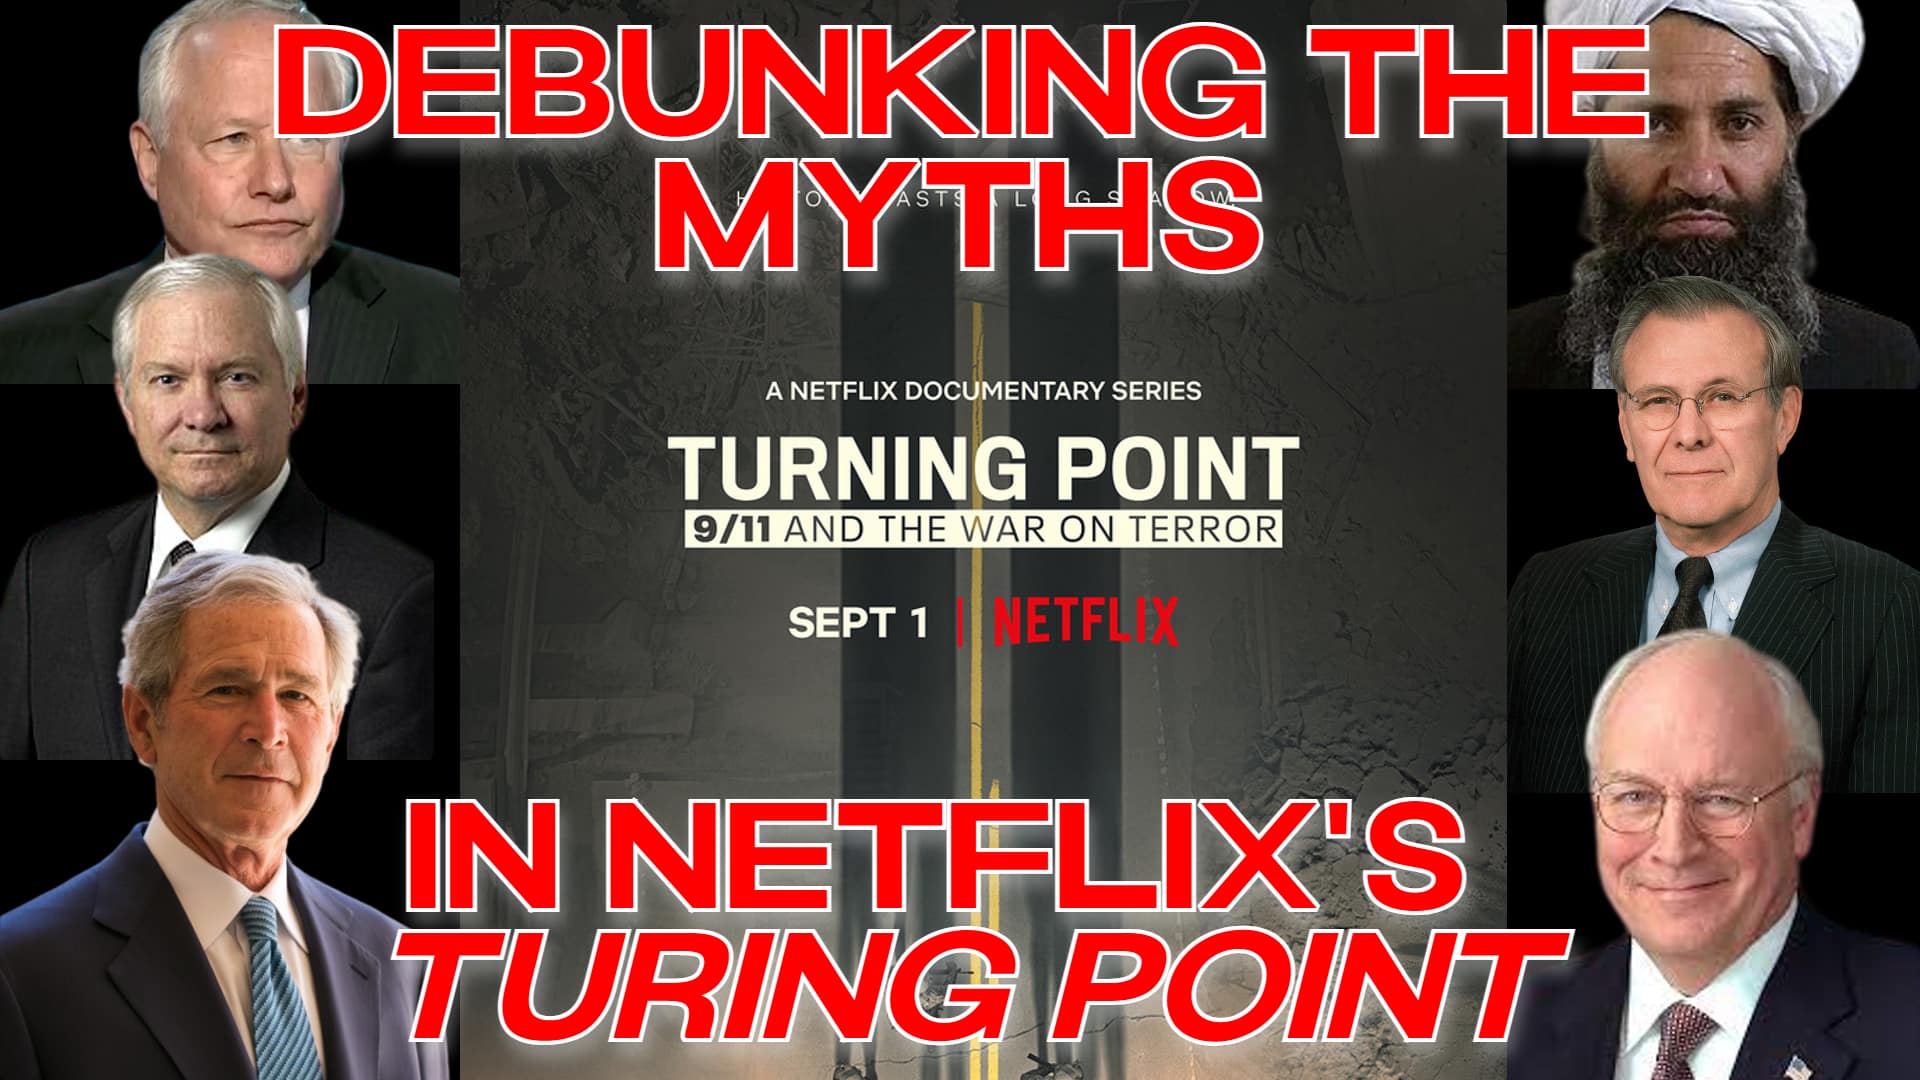 COI Review: Netflix’s 9/11 Documentary Turning Point